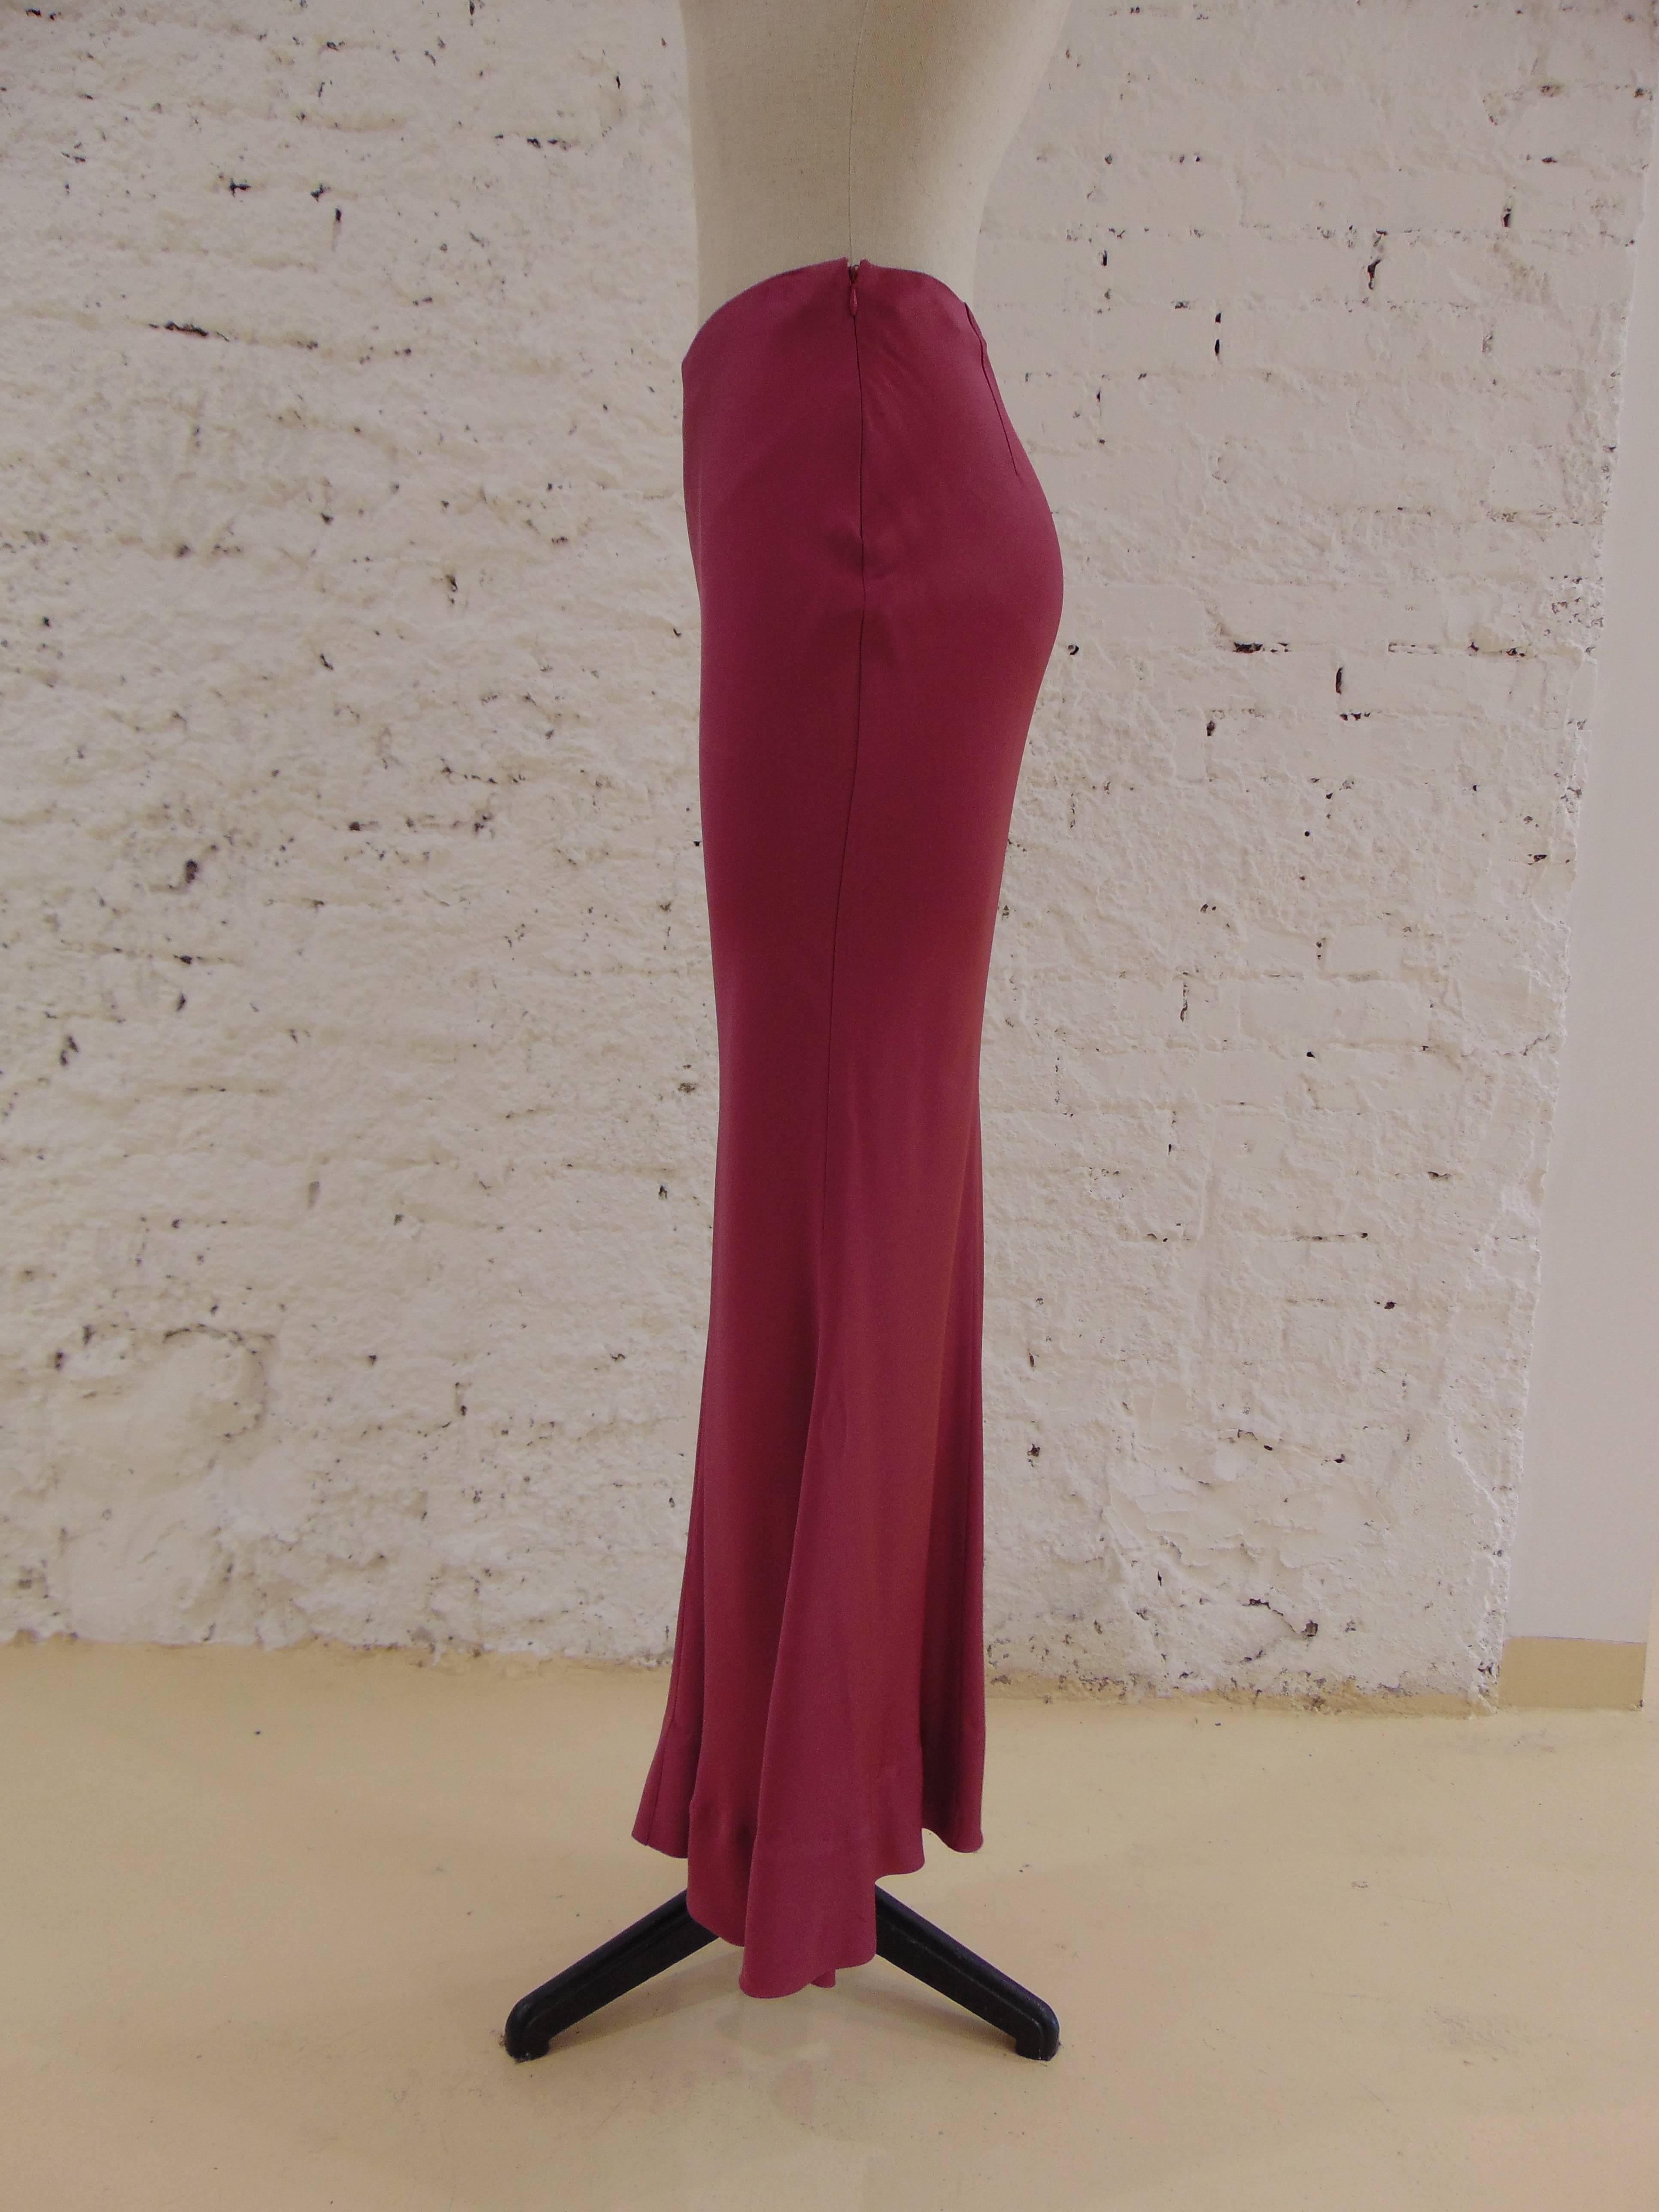 John Galliano pink silk long skirt
totally made in italy in size 40
Unworn